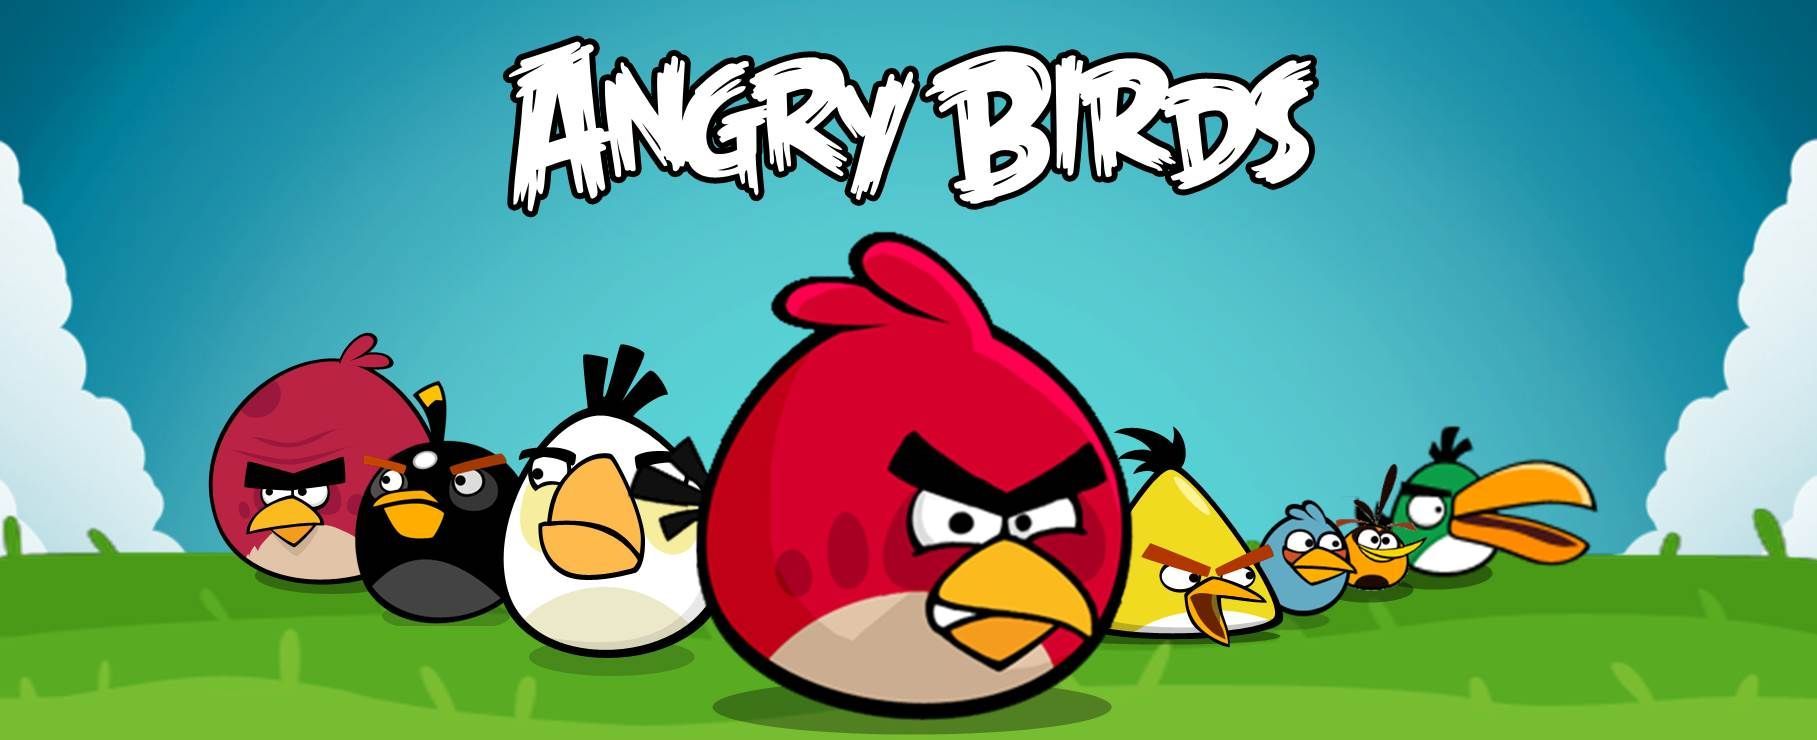 Angry Birds HD desktop wallpaper, High Definition 1024×770 Angry